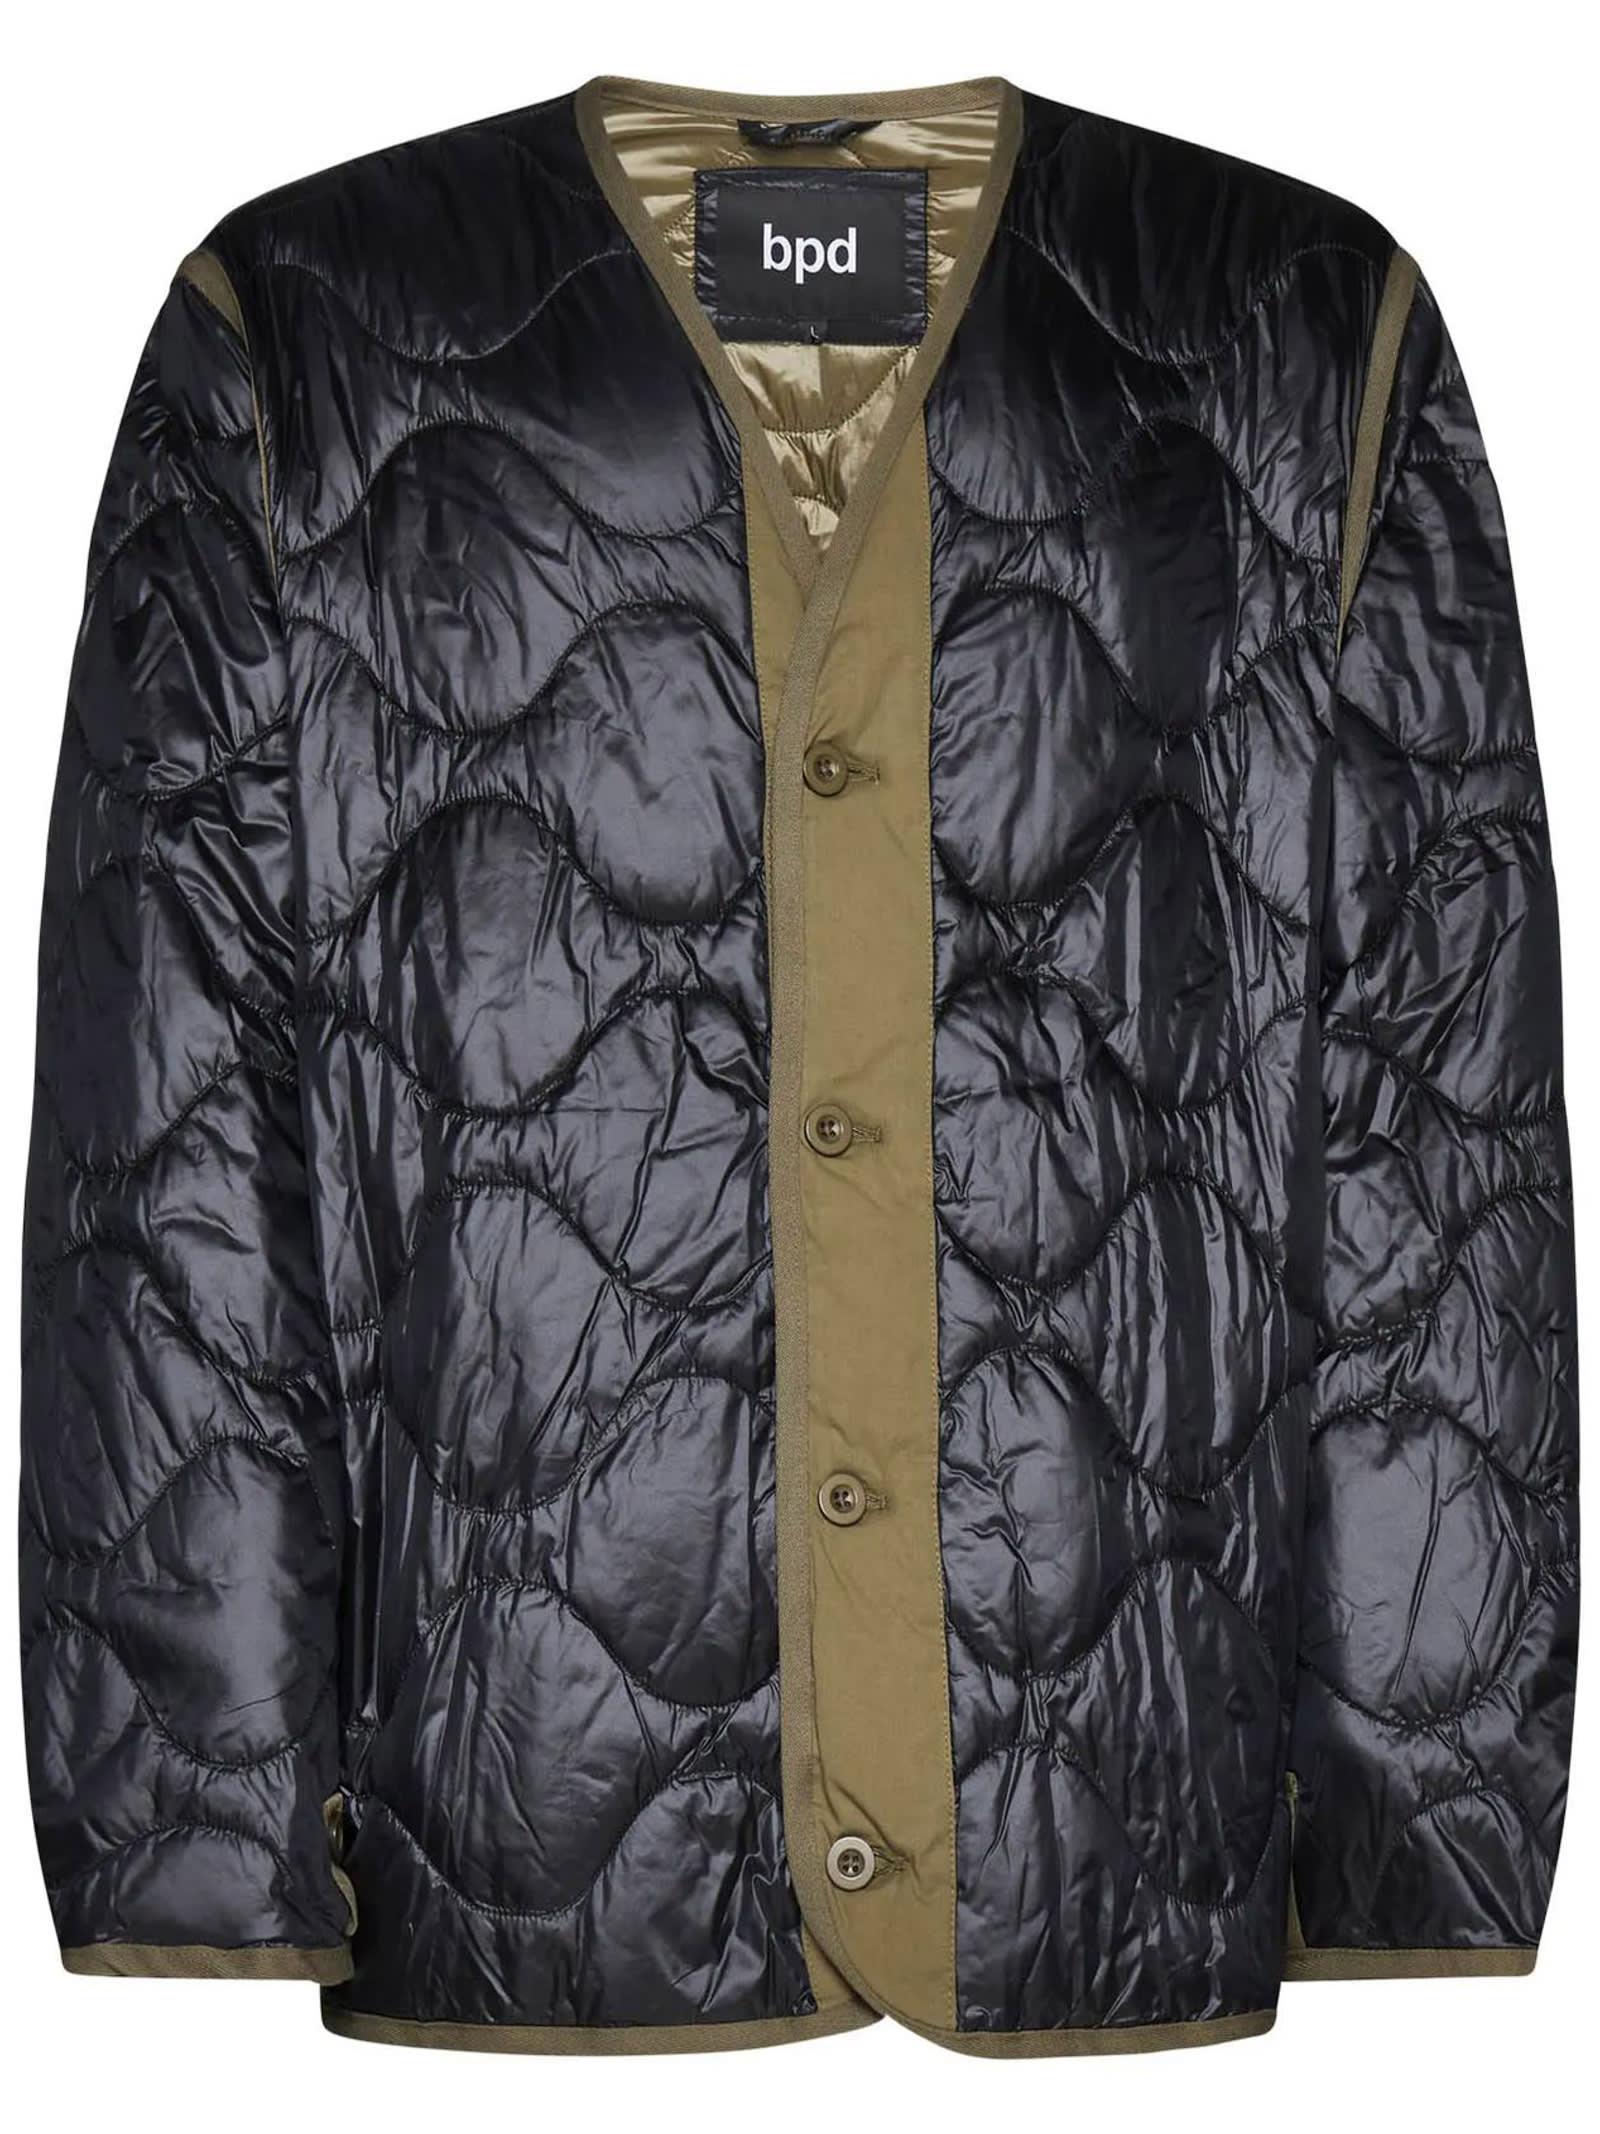 Bpd (Be Proud of this stress) Black Quilted Jacket